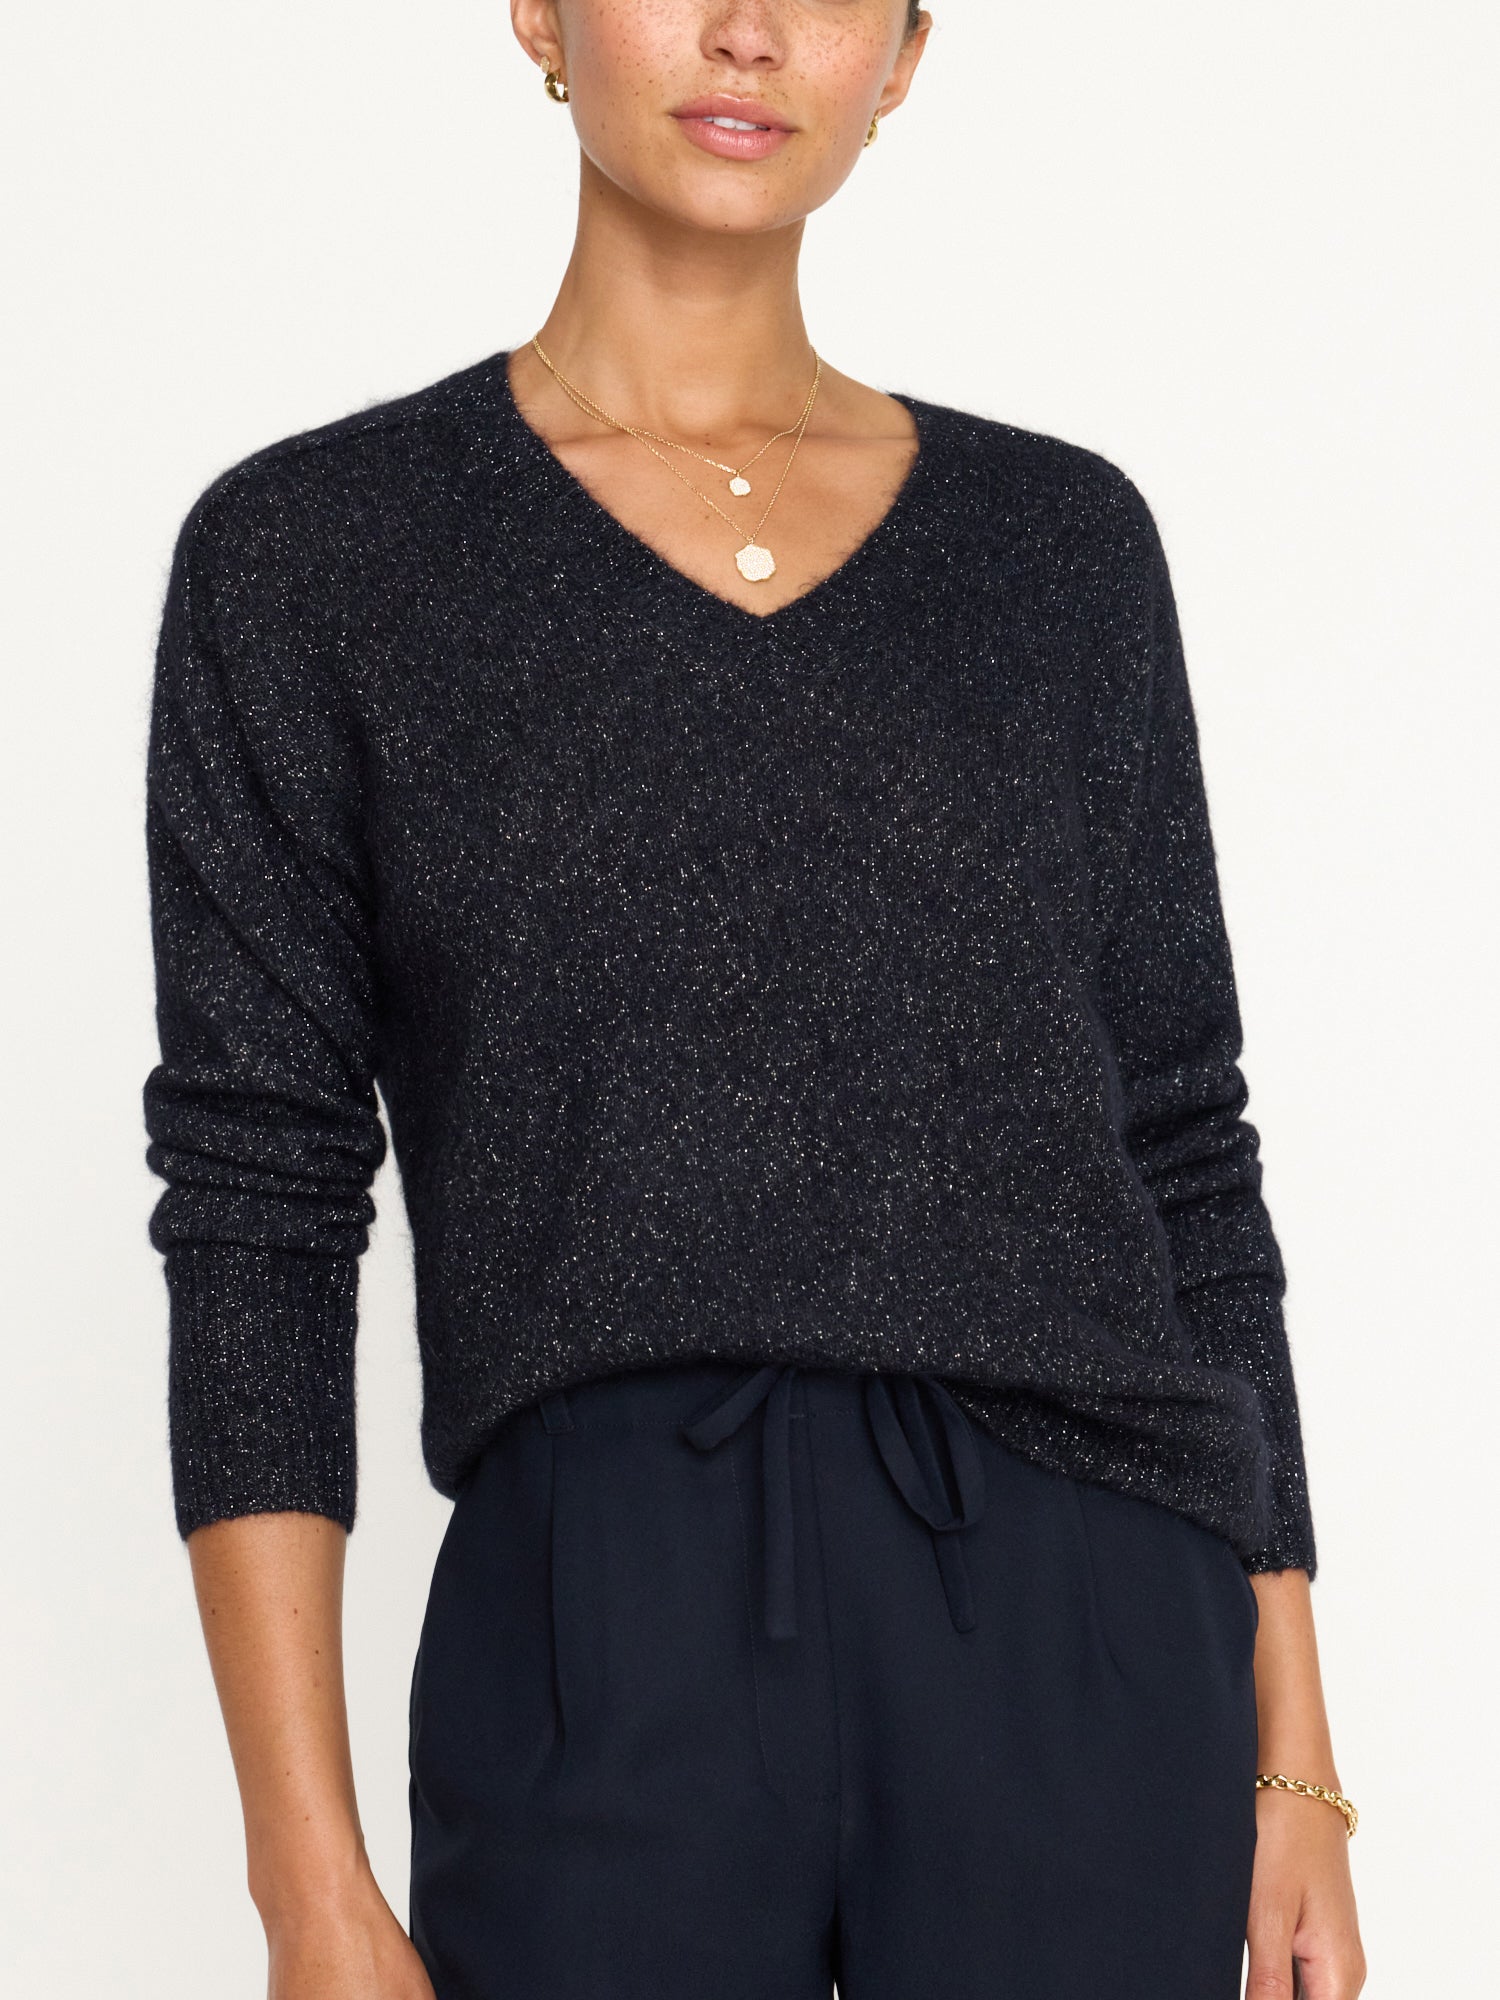 The Allery V-Neck Sweater